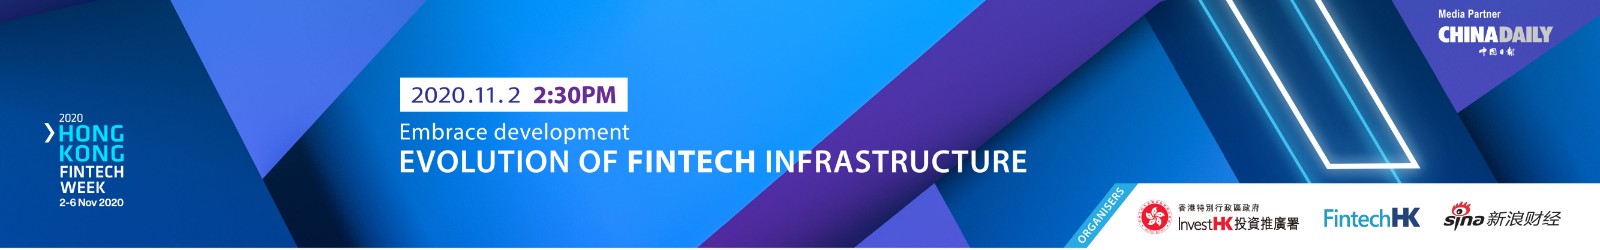 Embrace the next trend: how new infrastructure changes our future in the context of Fintech?